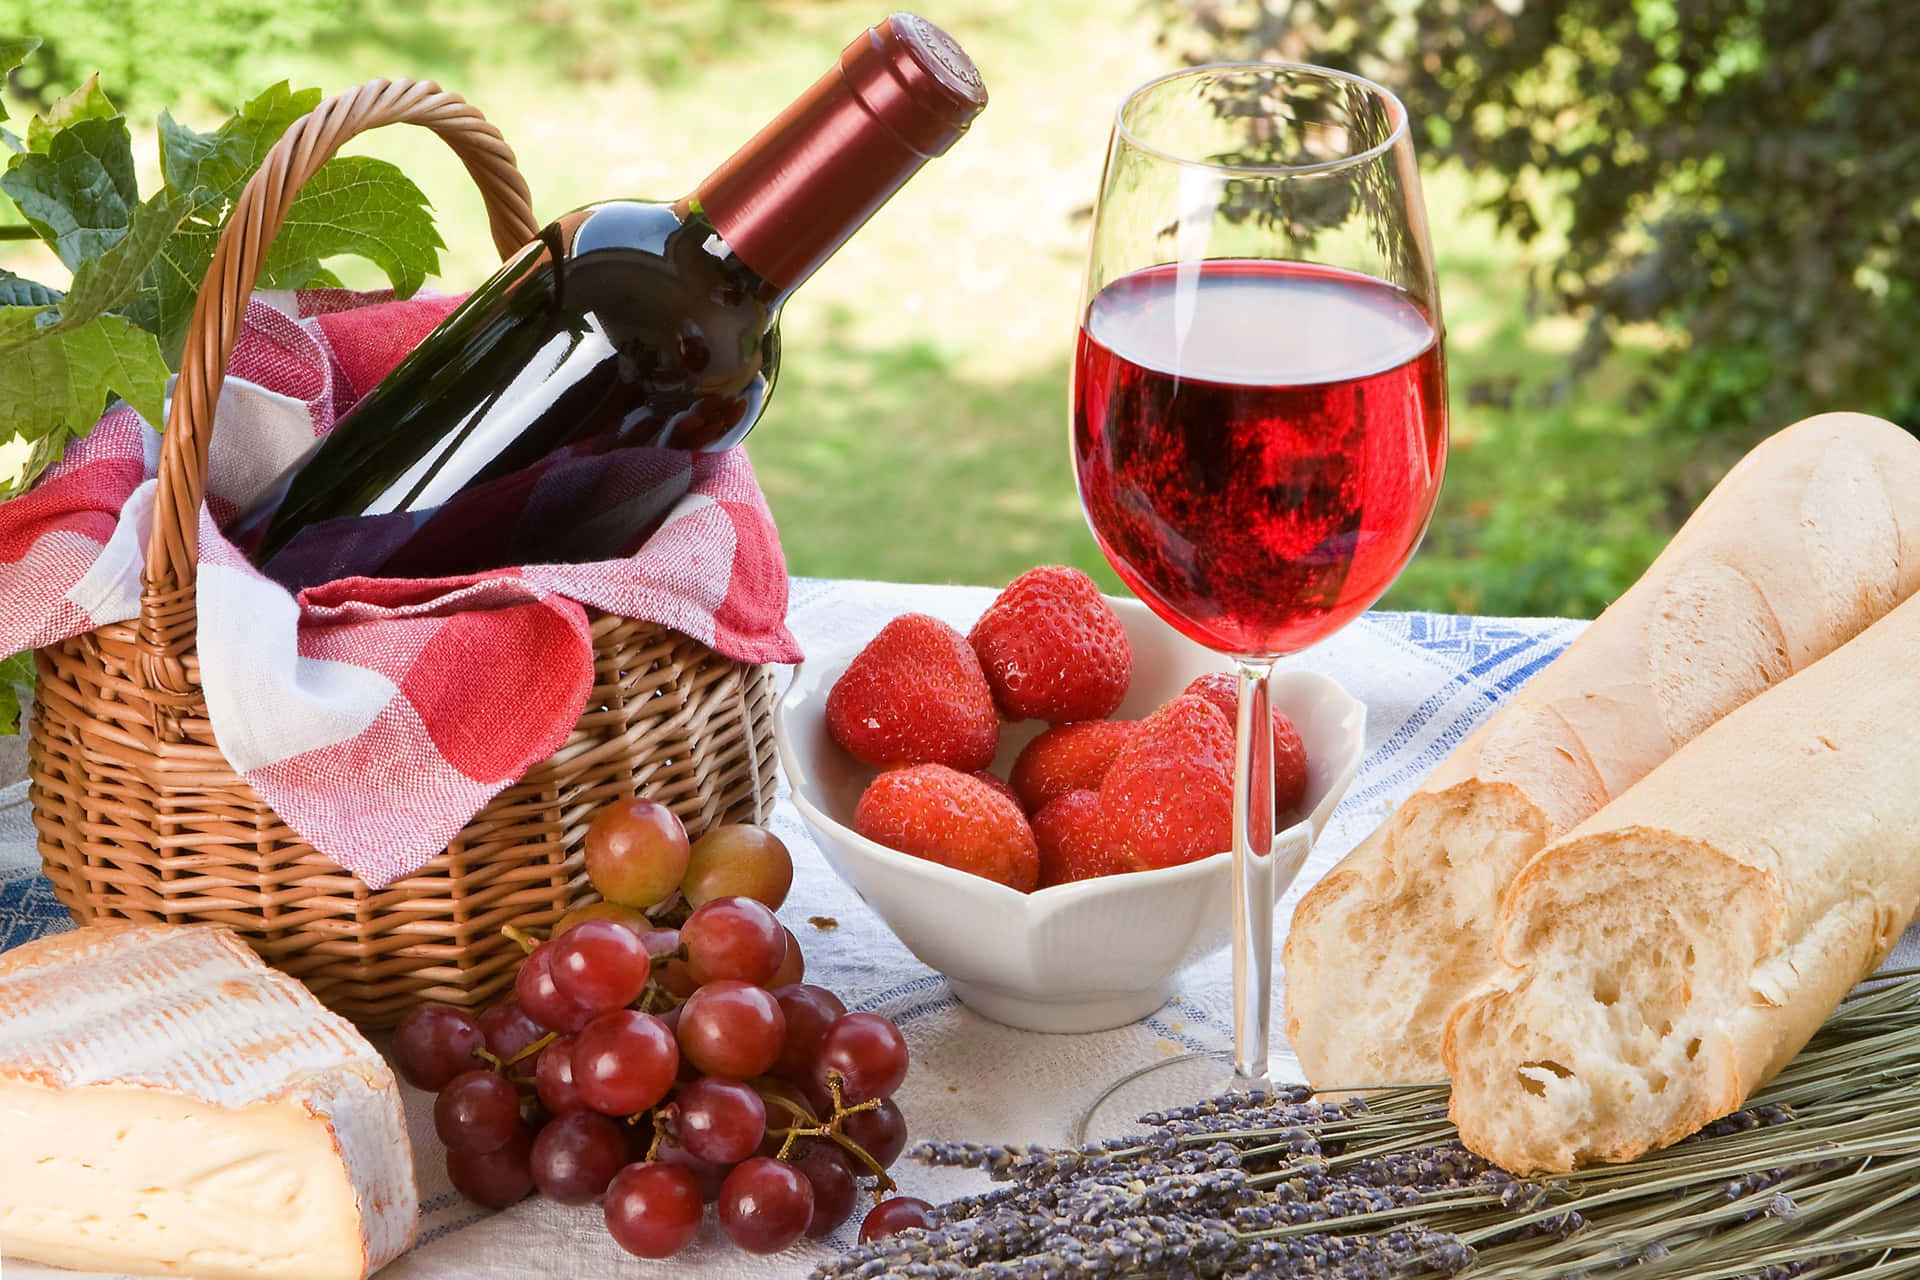 Picnic Set Up With Wine And Berries Picture